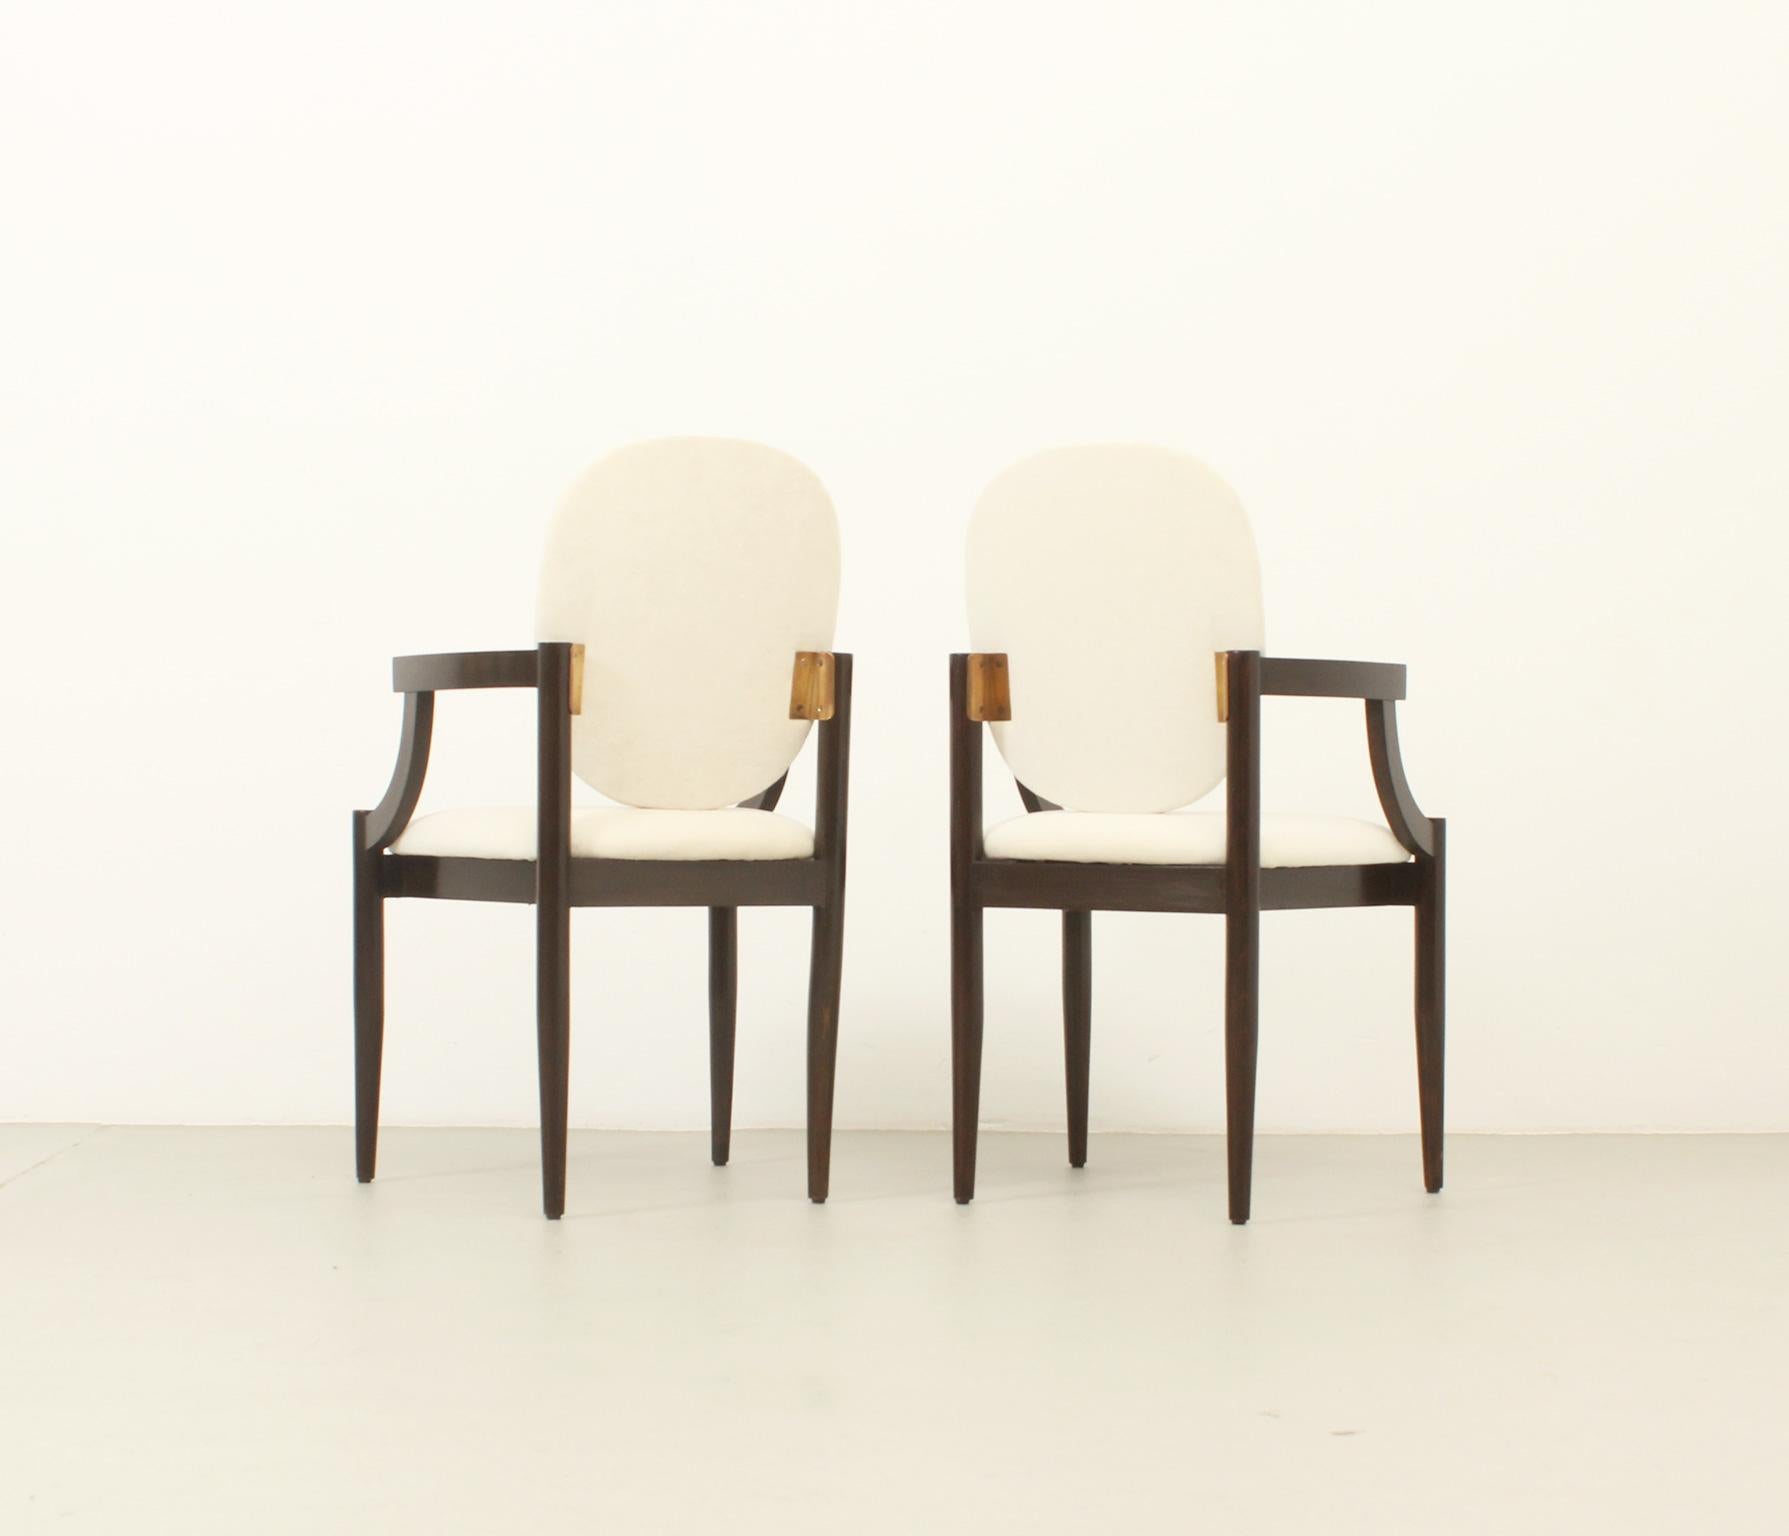 Six Reno Chairs by Spanish Architects Correa & Milá, 1961 For Sale 2